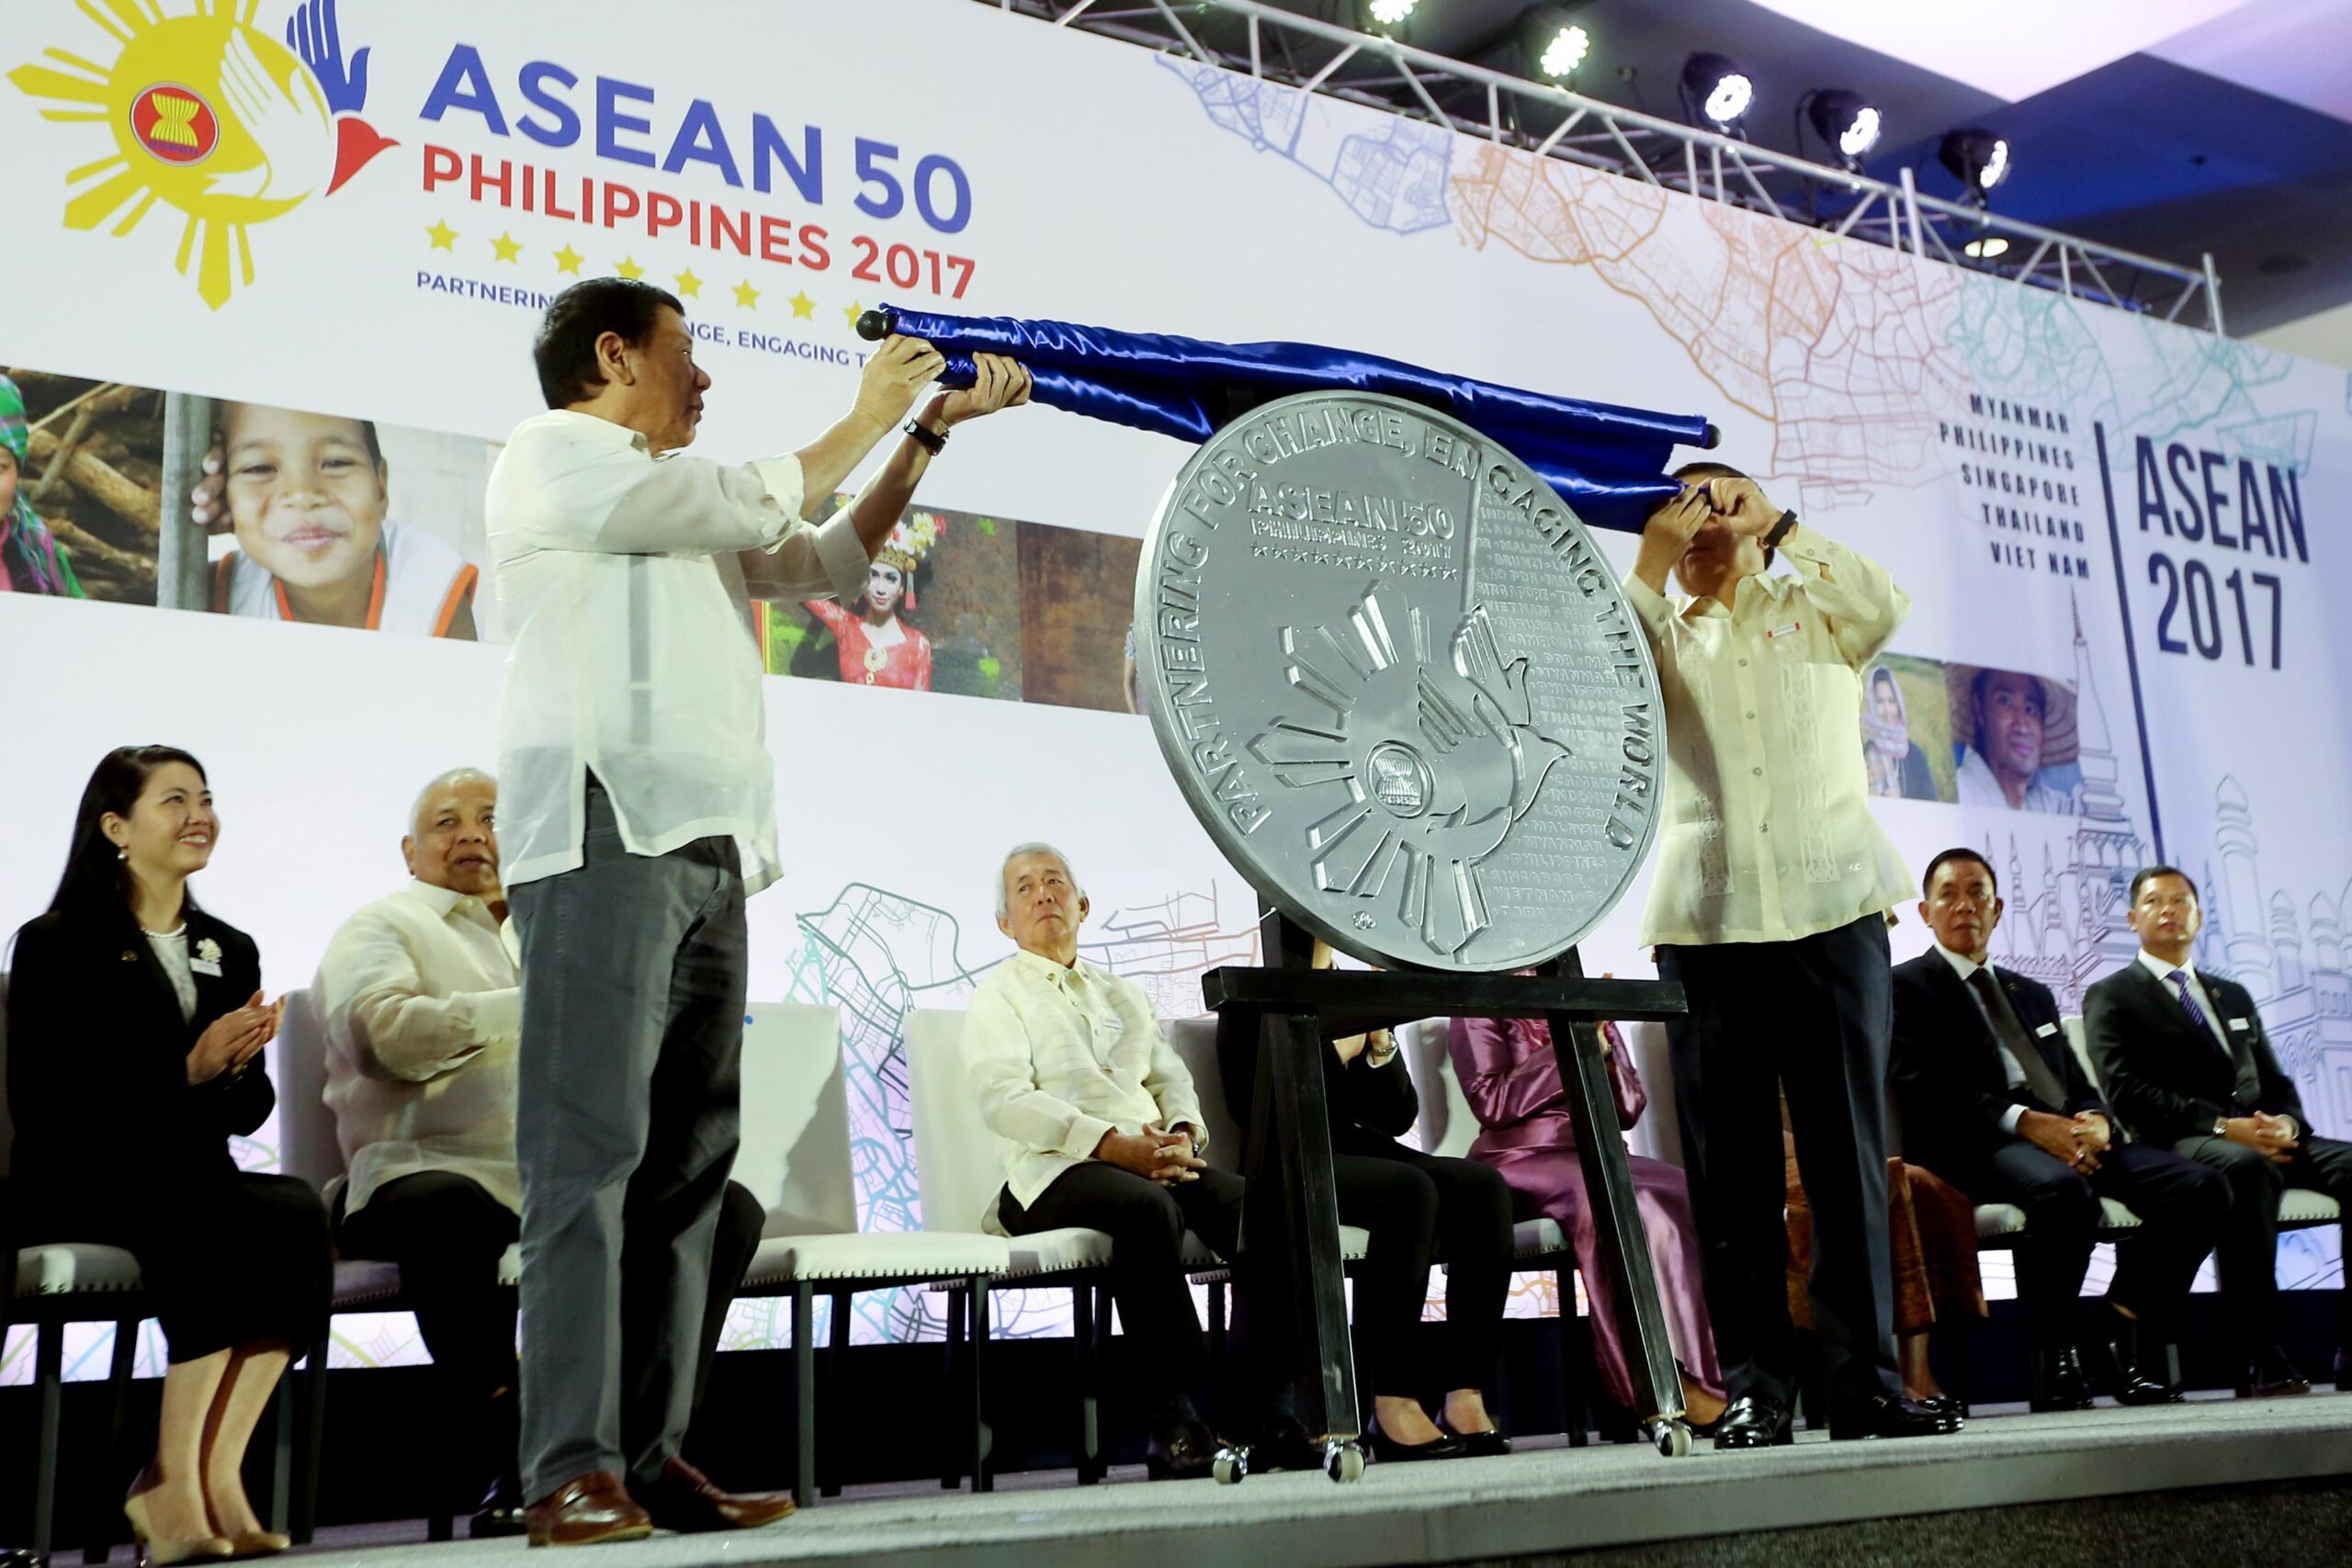 1/3 of ASEAN 2017 budget devoted to security